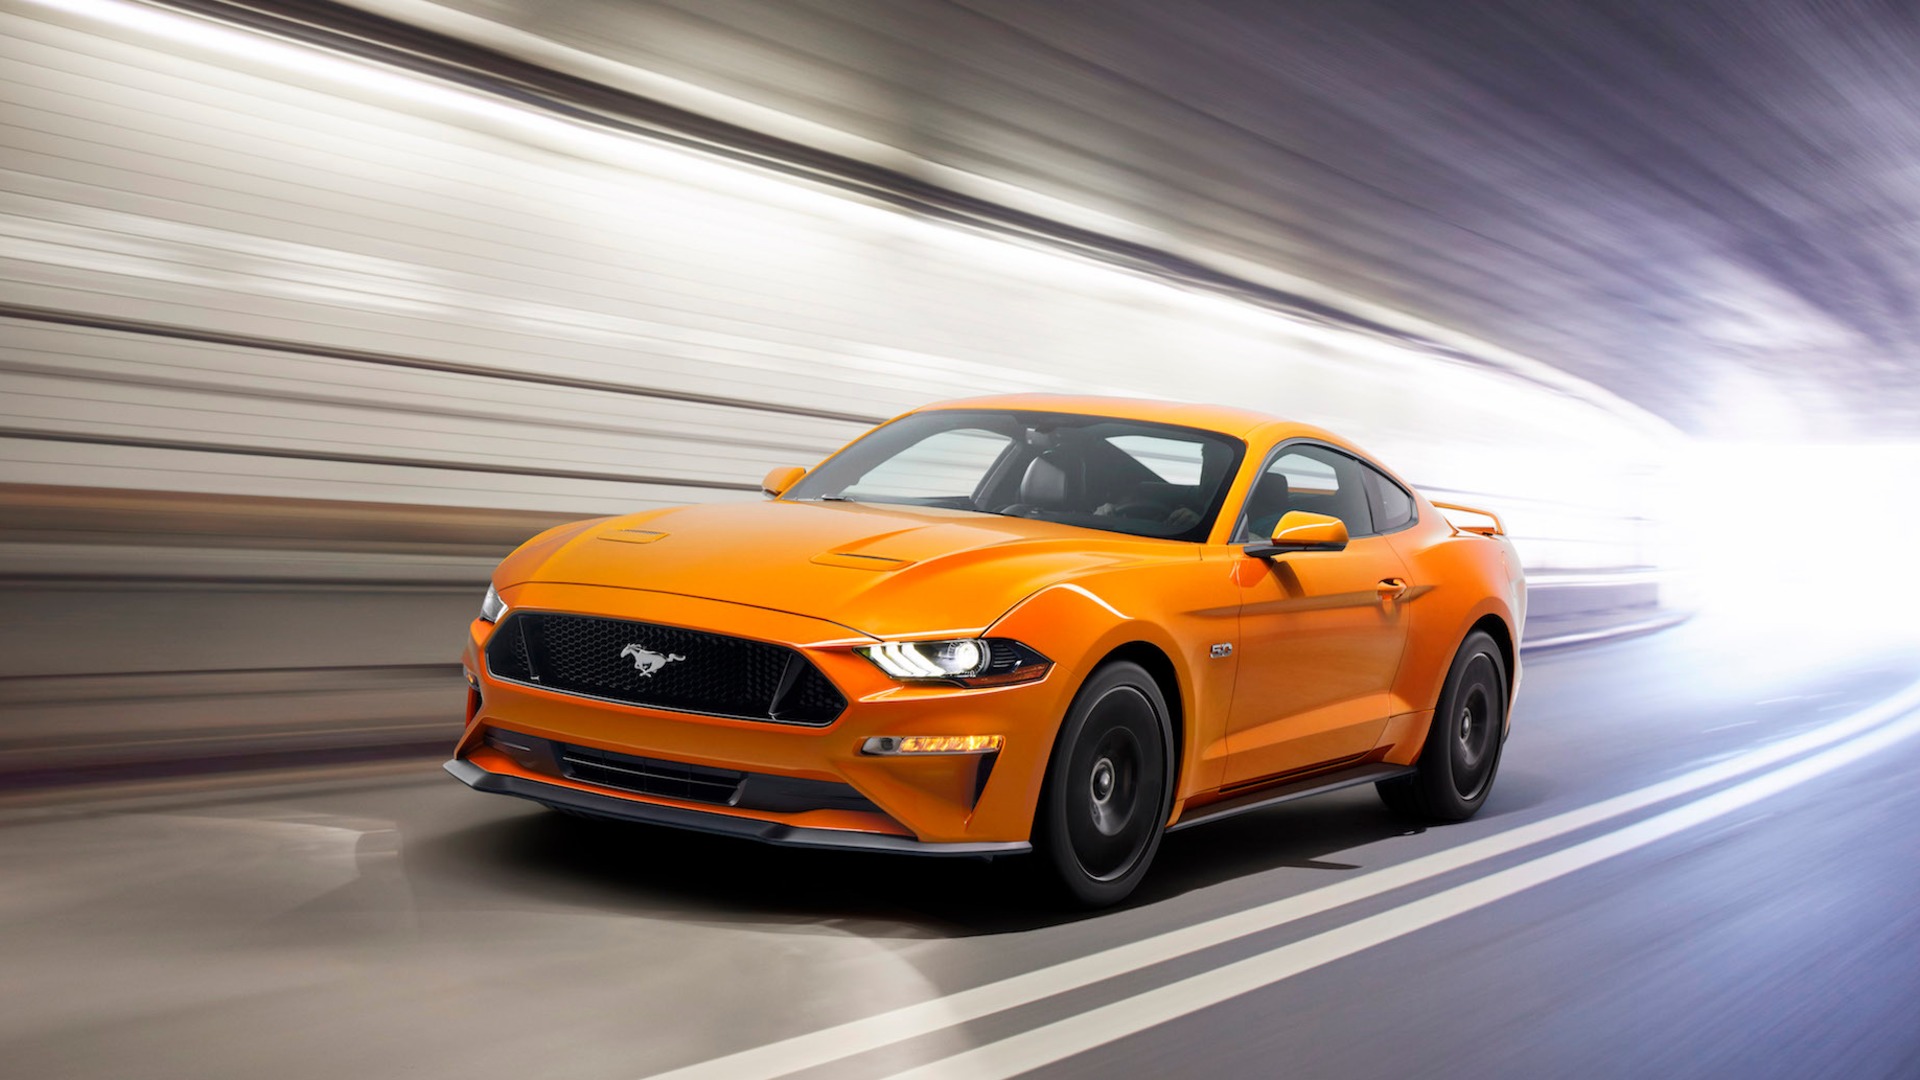 Ford’s 2018 Mustang GT can do 0-to-60 mph in under 4 seconds